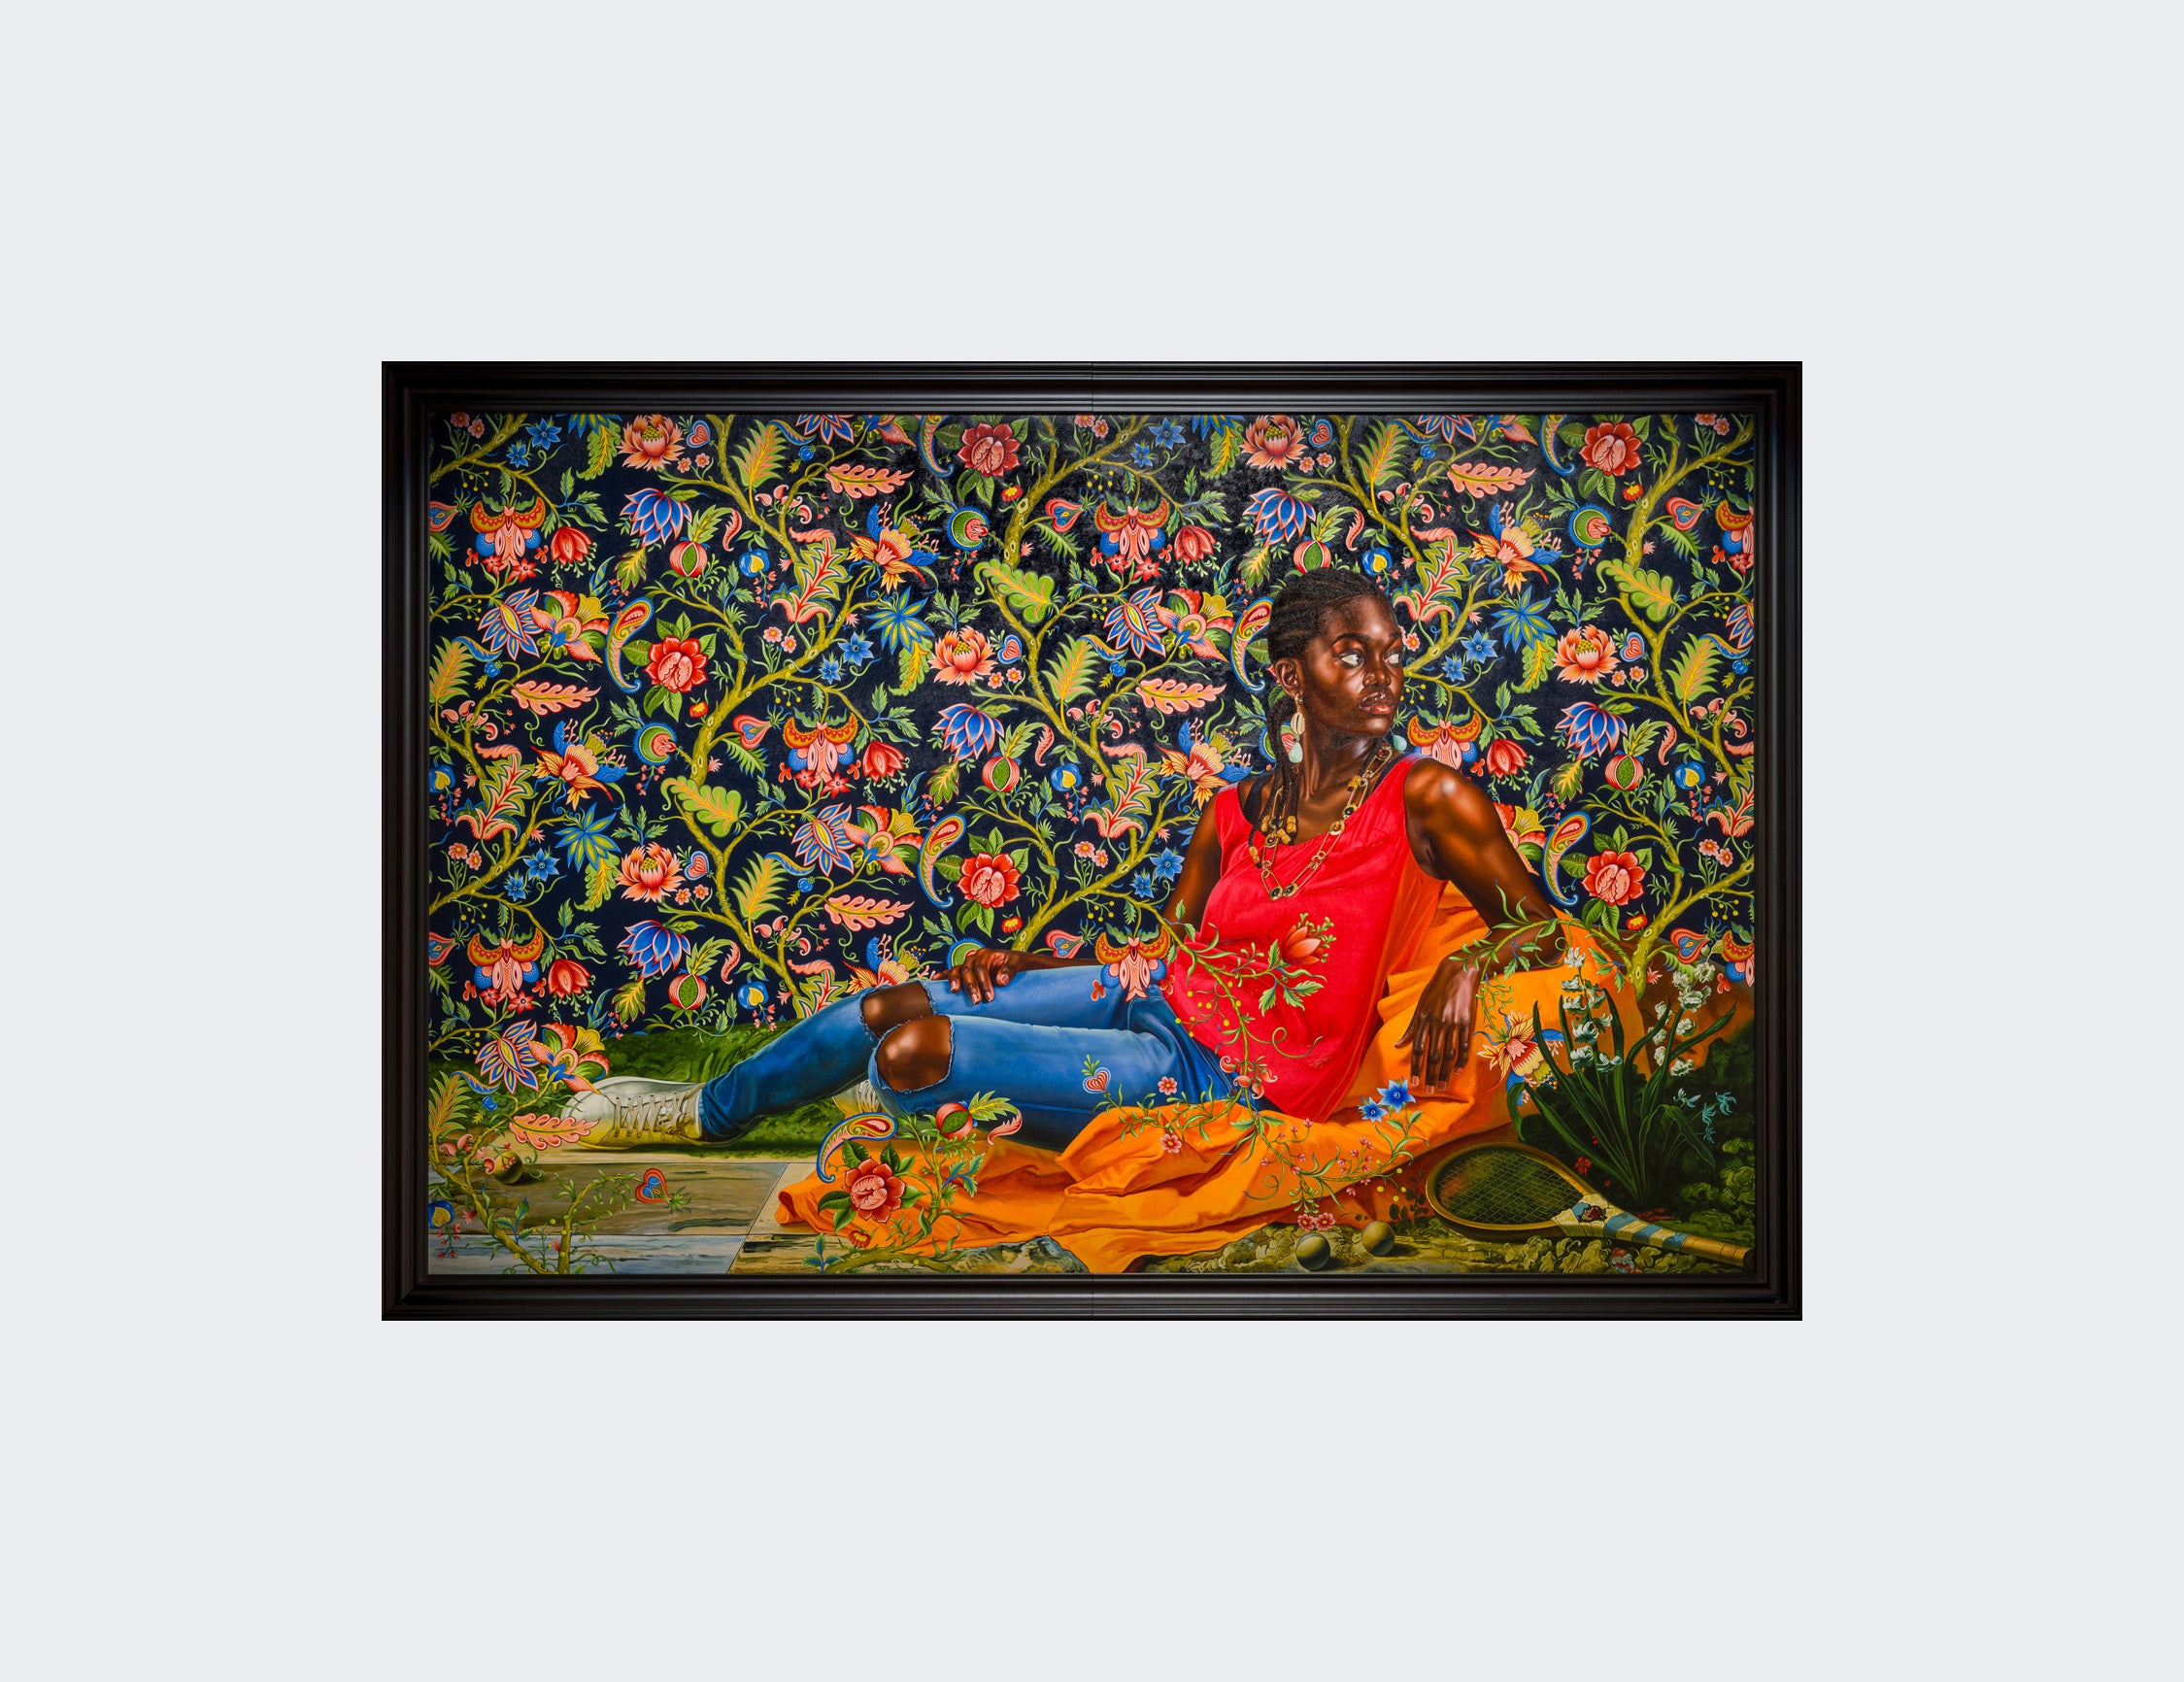 Kehinde Wiley's Reclamation of Black Lives